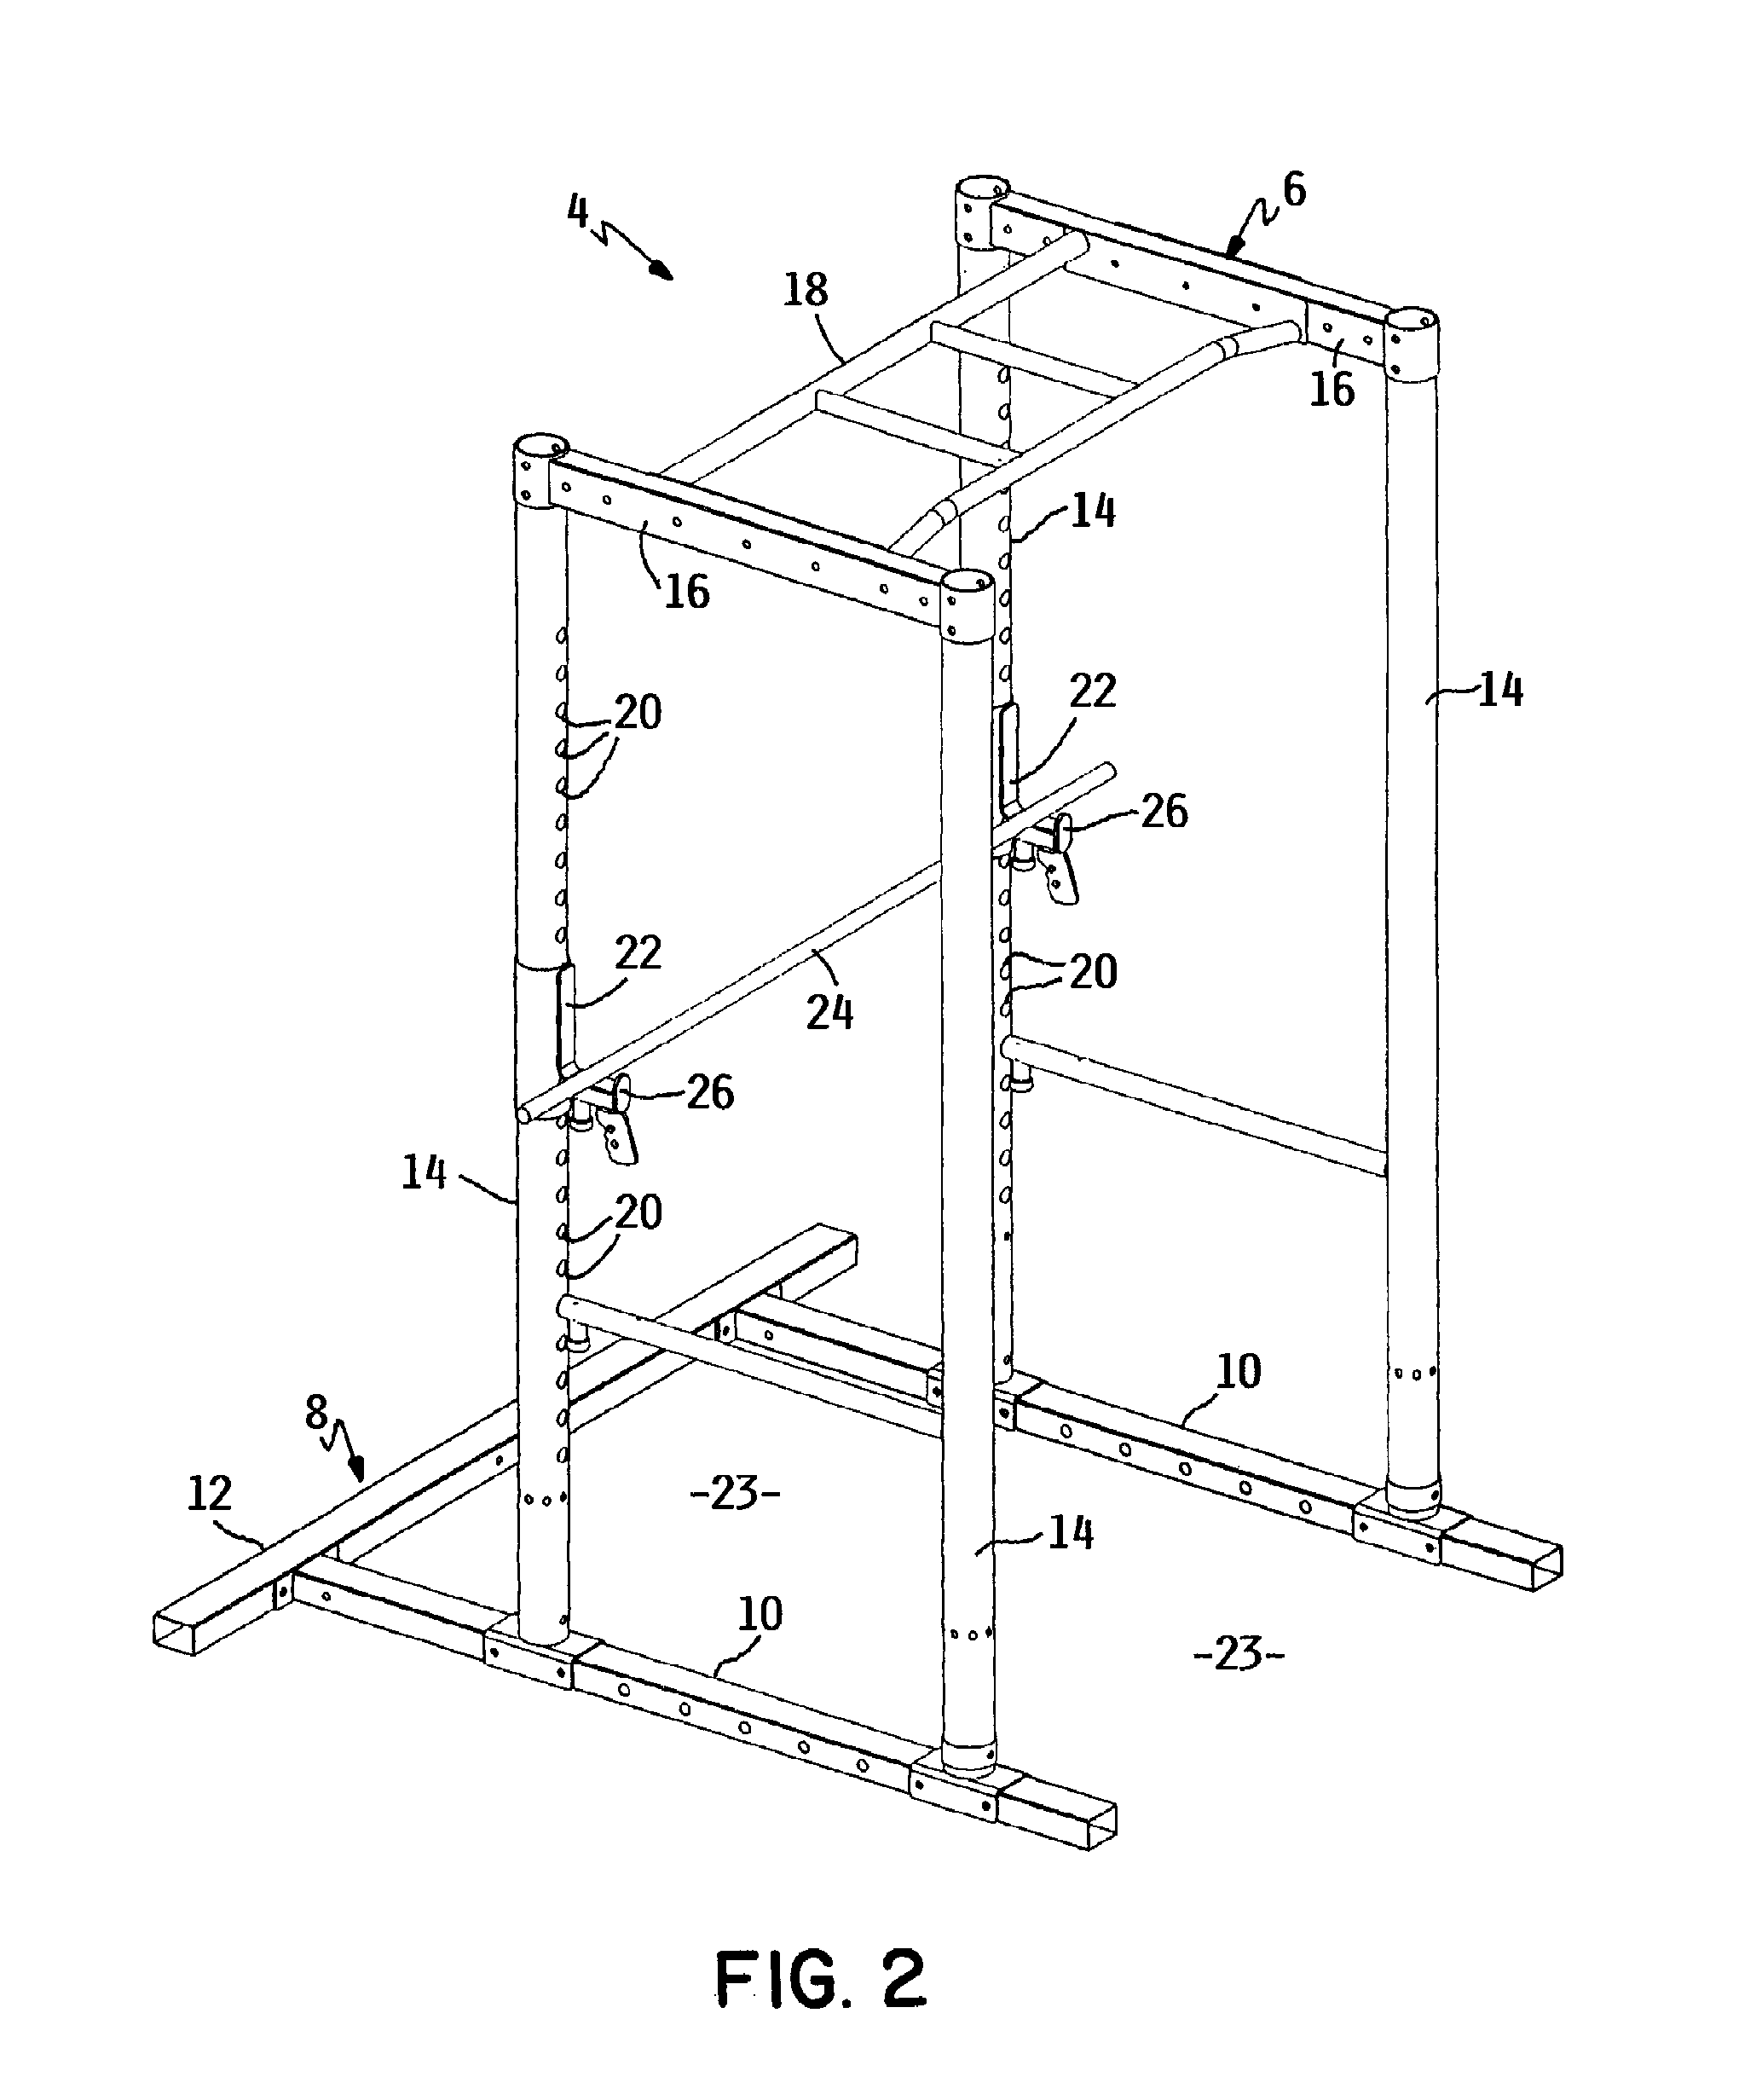 Exercise machine for providing weight lifting exercises similar to those provided by a free weight barbell